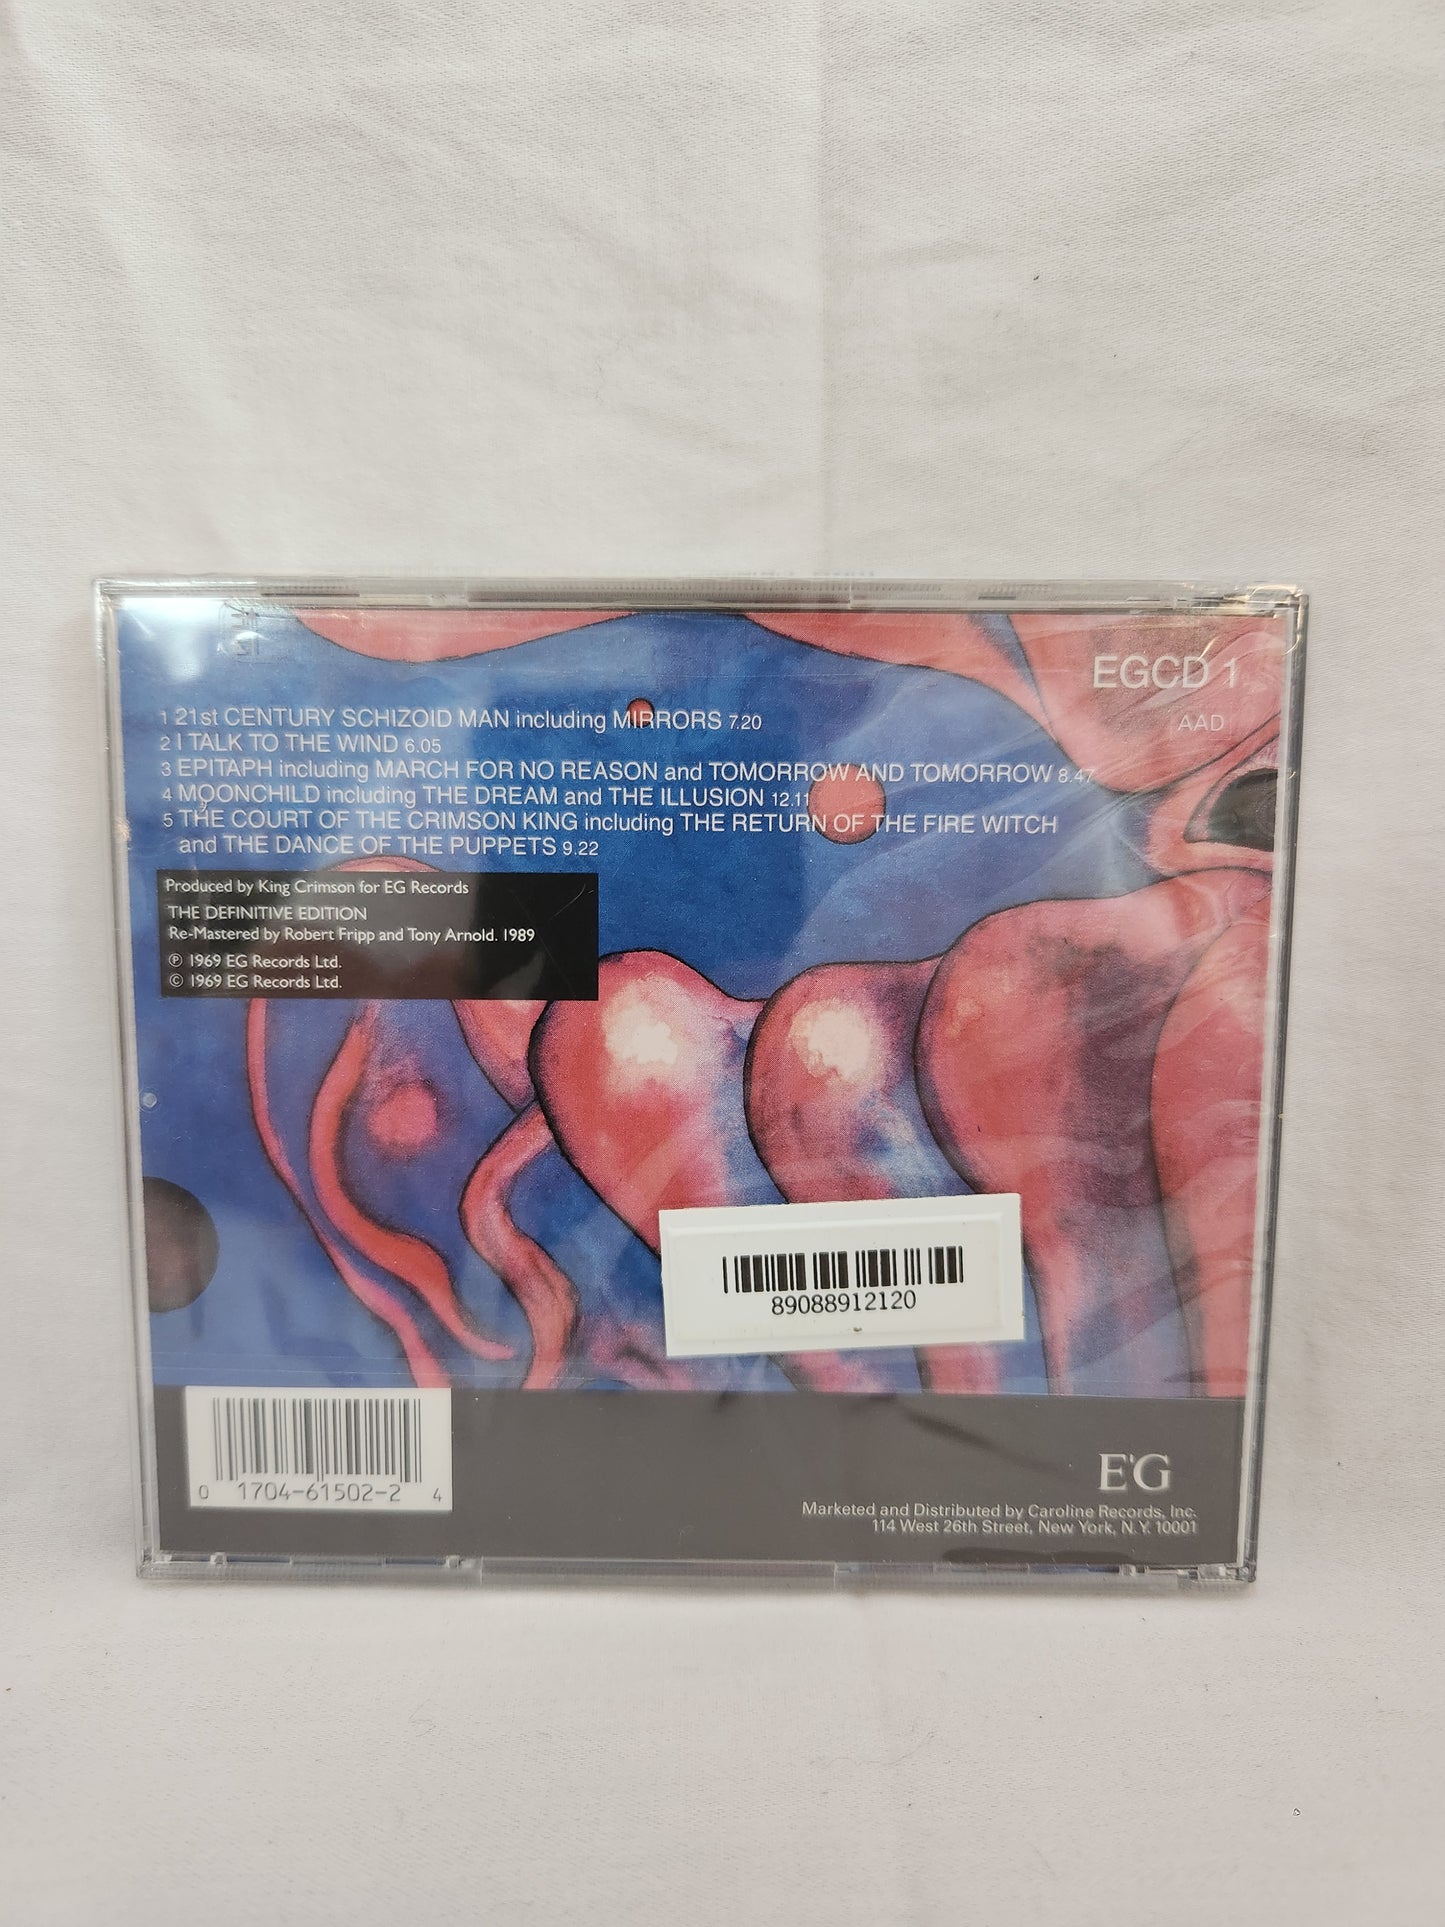 King Crimson: In the Court of the Crimson King CD - Re-Mastered 1989